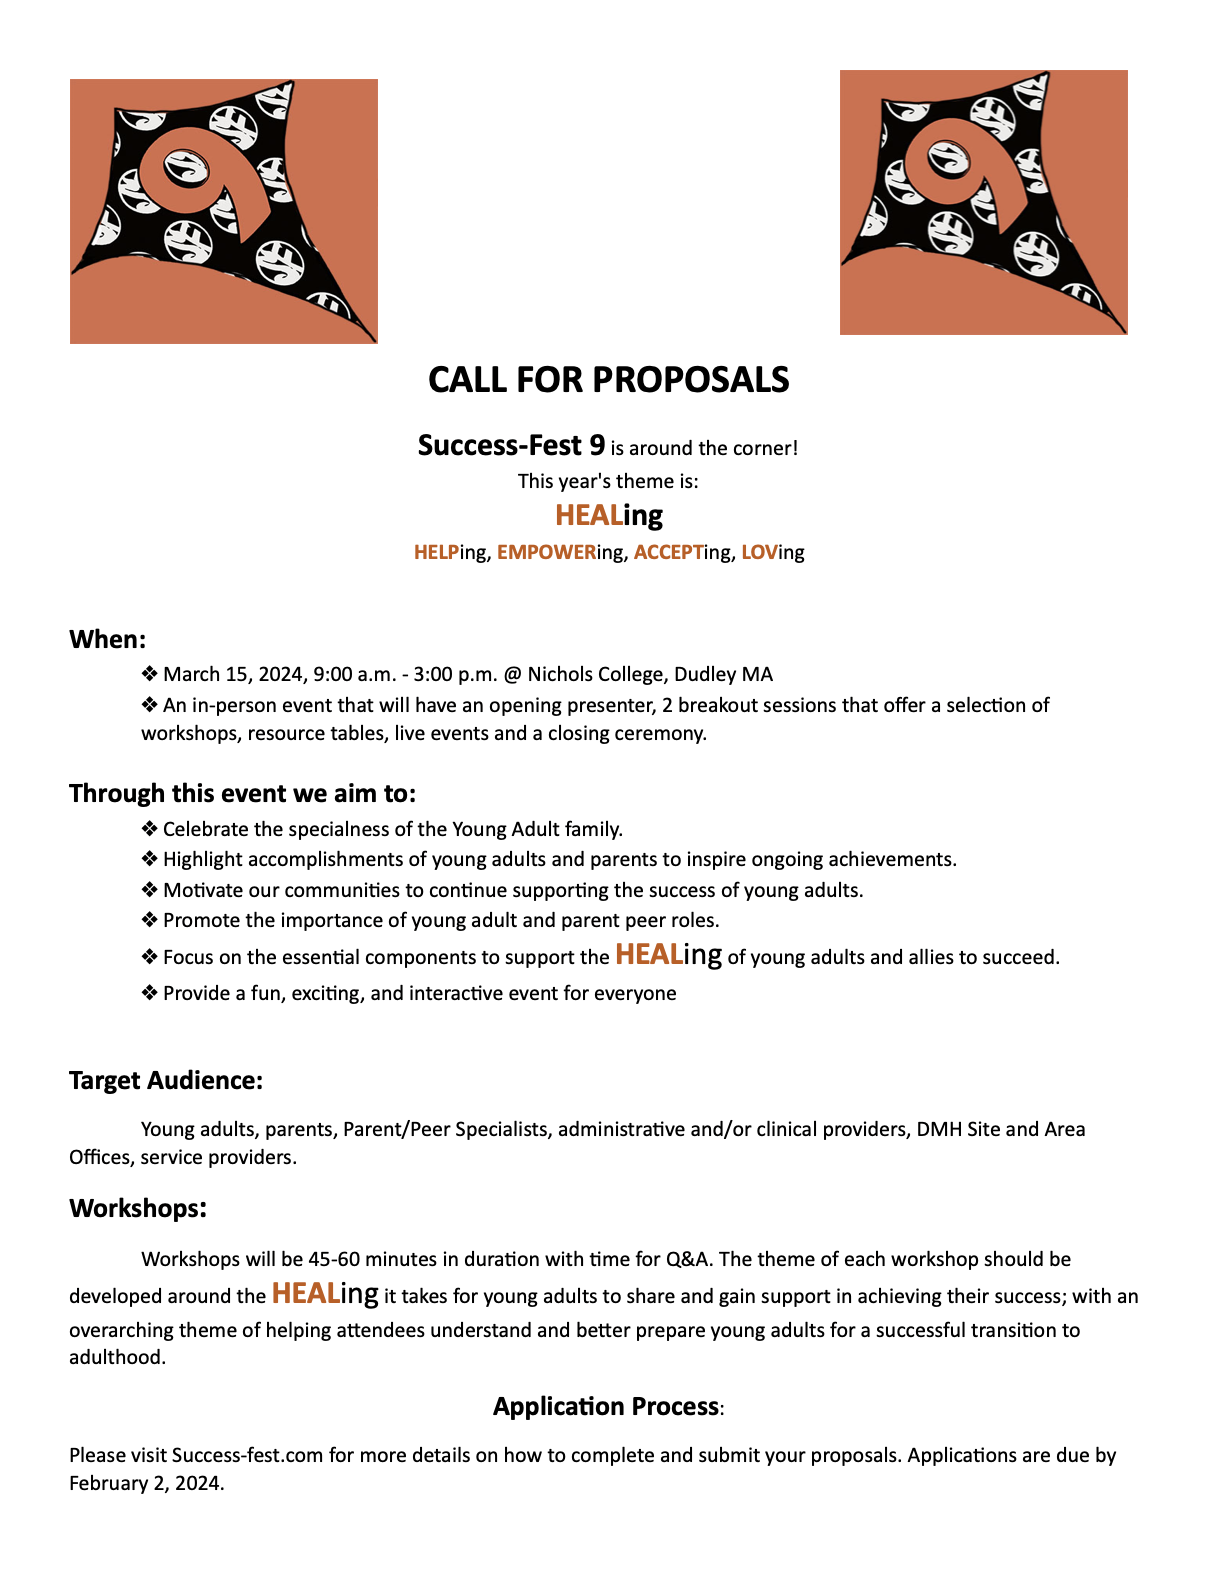 Call for proposals 2024